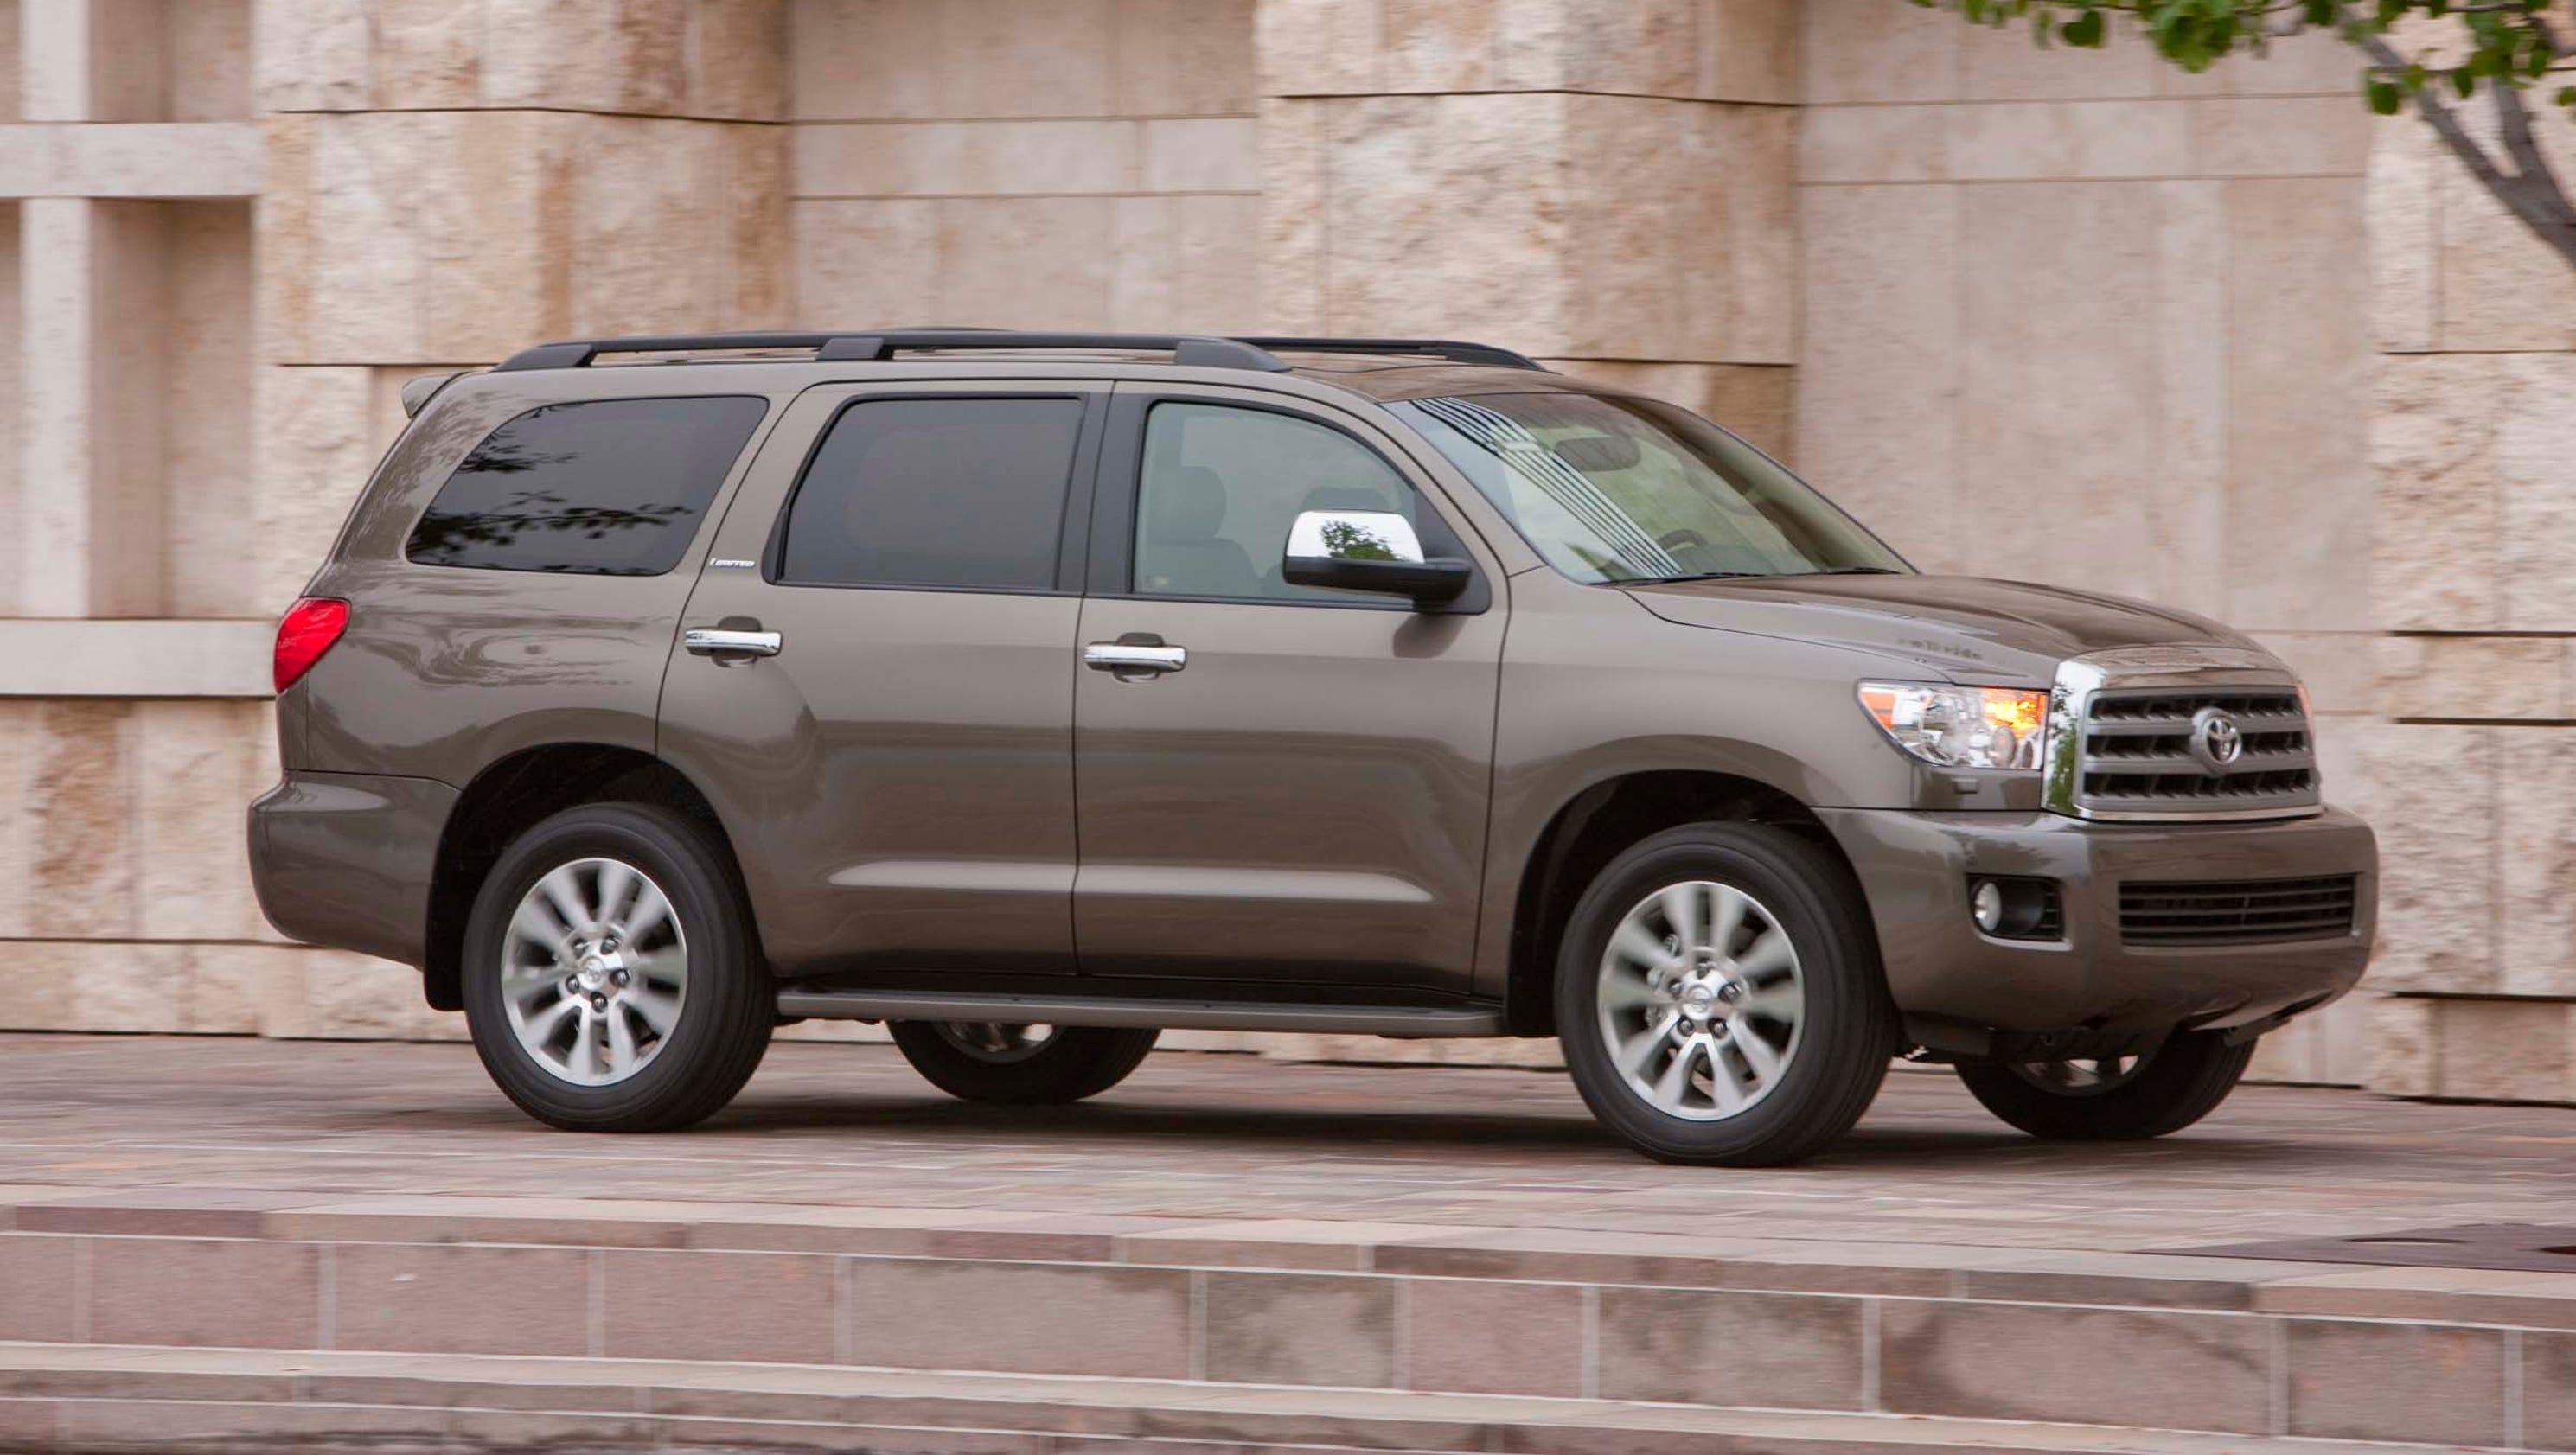 Full-size SUVs most likely to make it to 200,000 miles, report shows